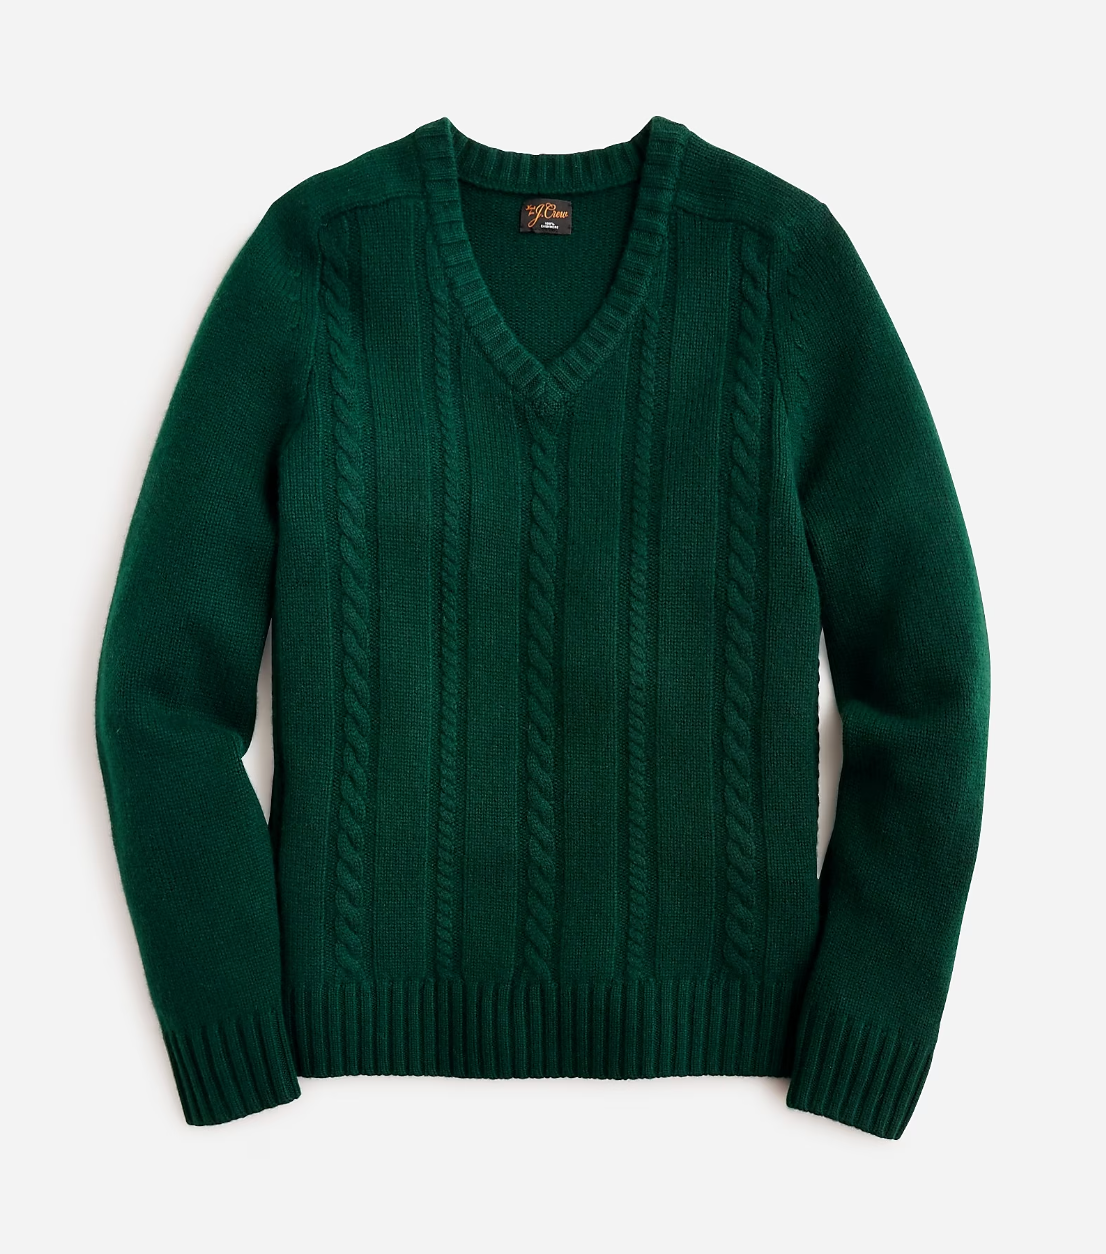 Heavyweight cashmere cable-knit V-neck sweater